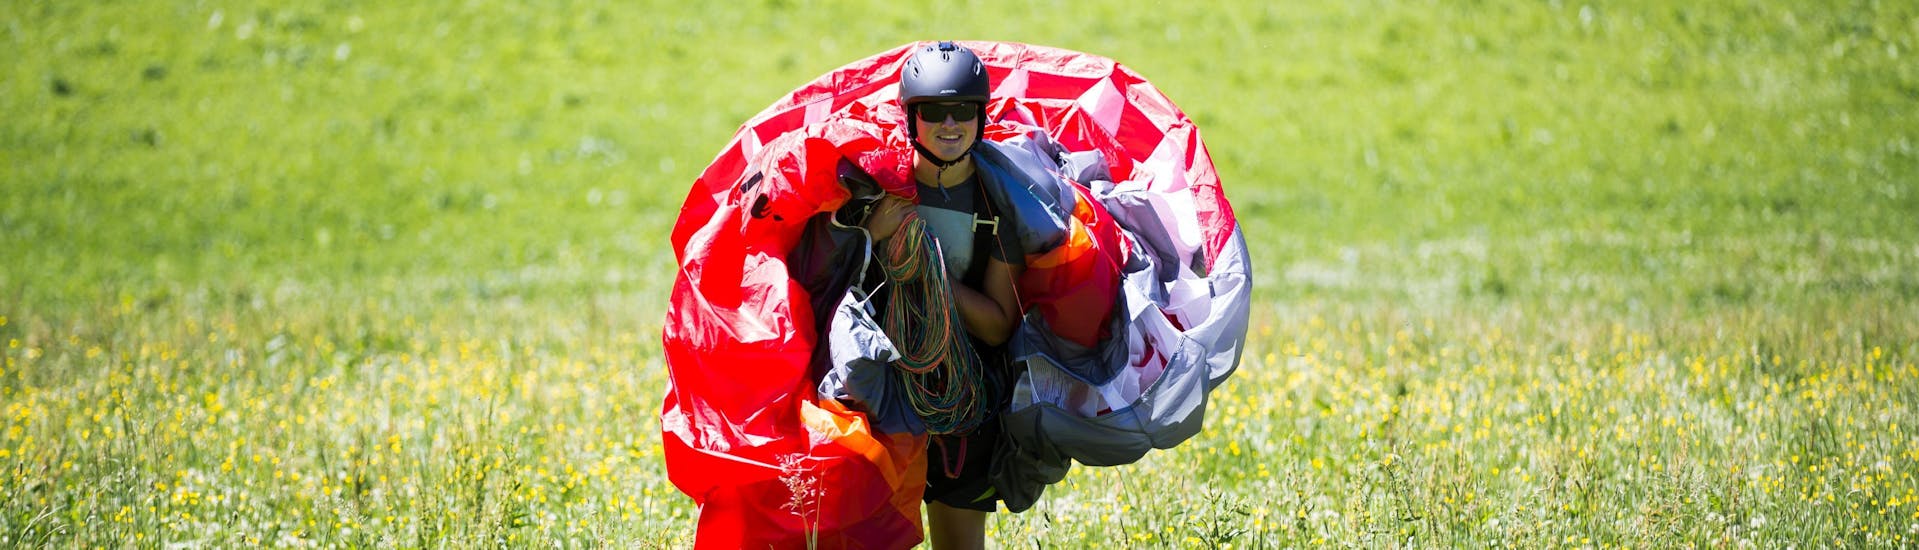 A costumer during the Half-Day Paragliding Trial Course in Werfenweng with Flugschule Austriafly Werfenweng.